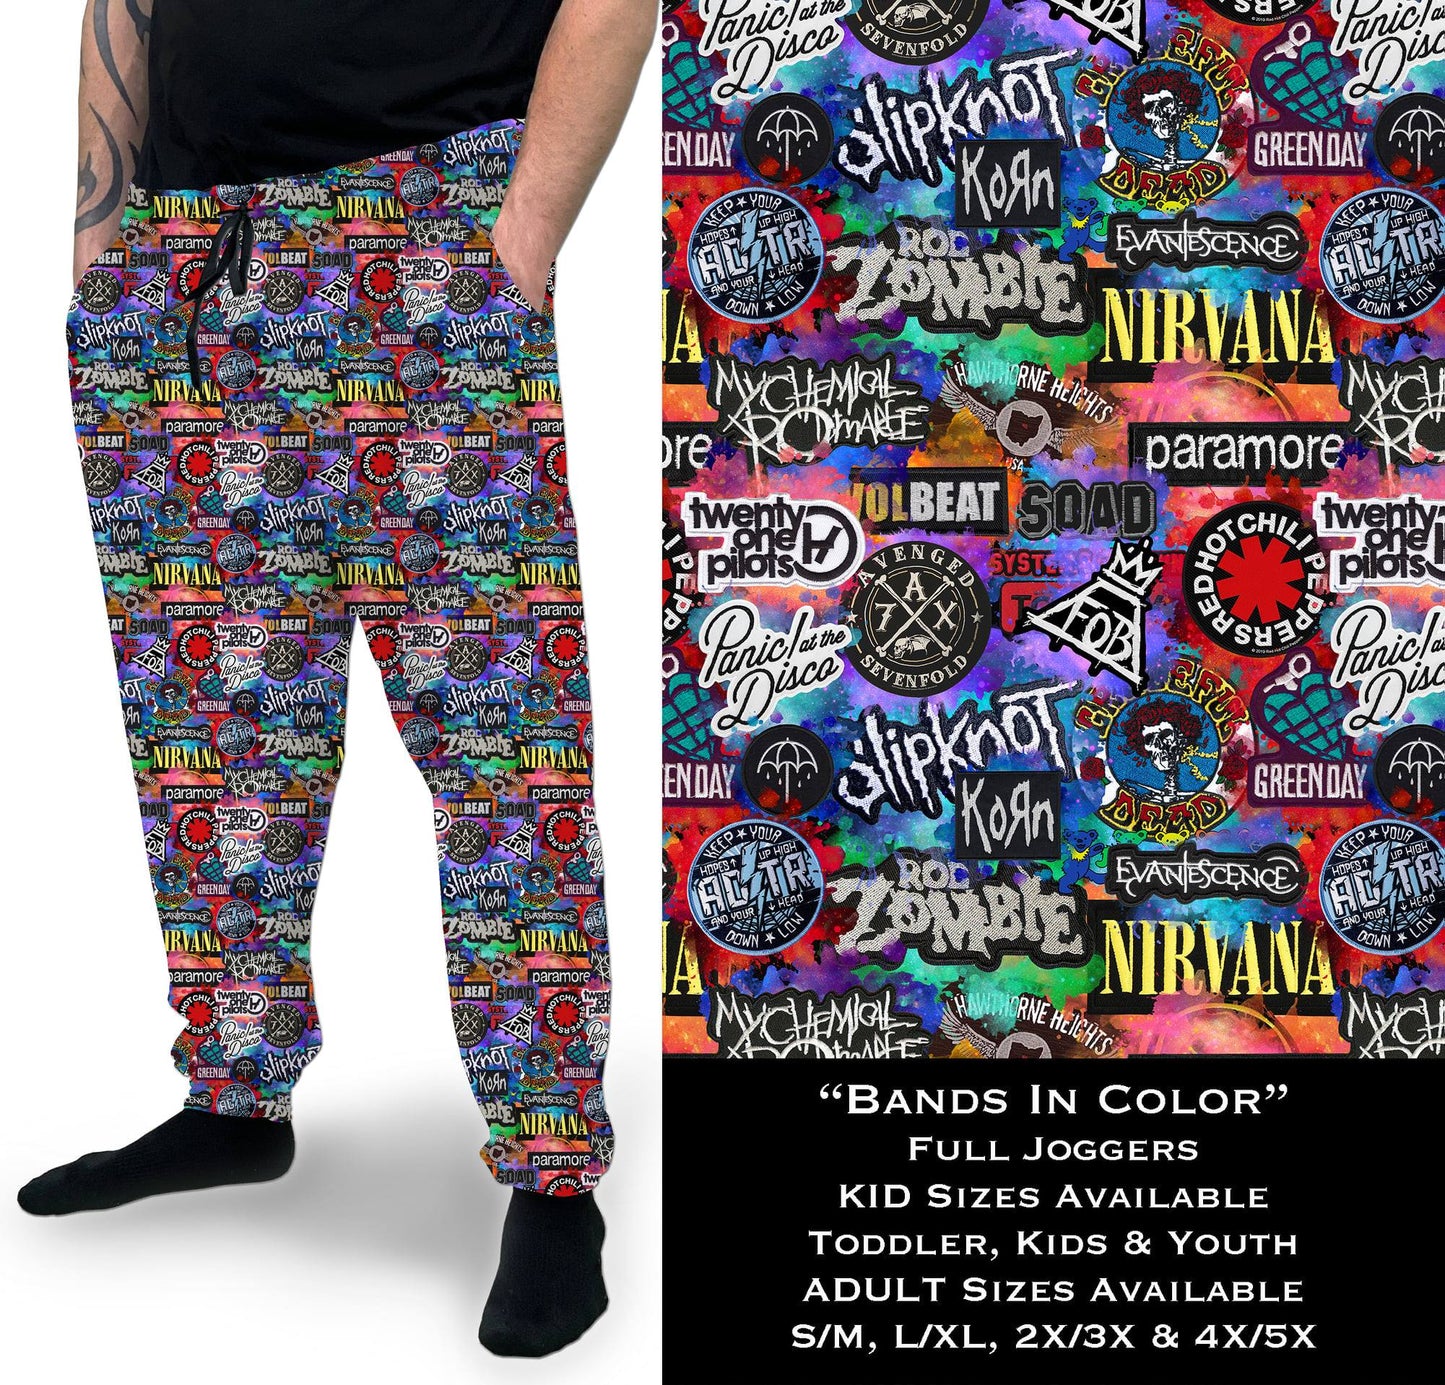 Bands in Color - Full Joggers